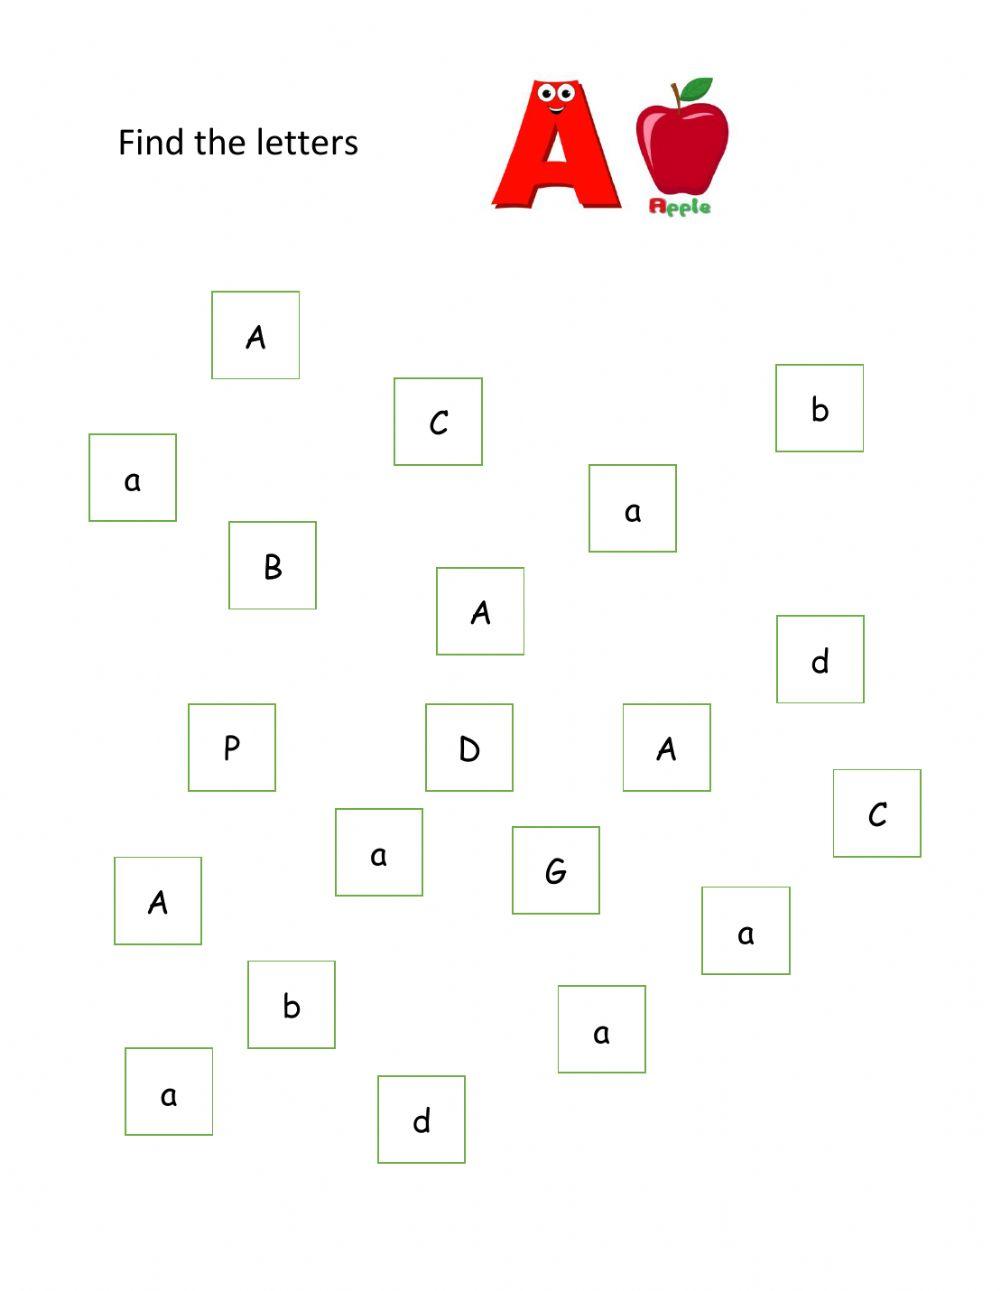 Find the letter A